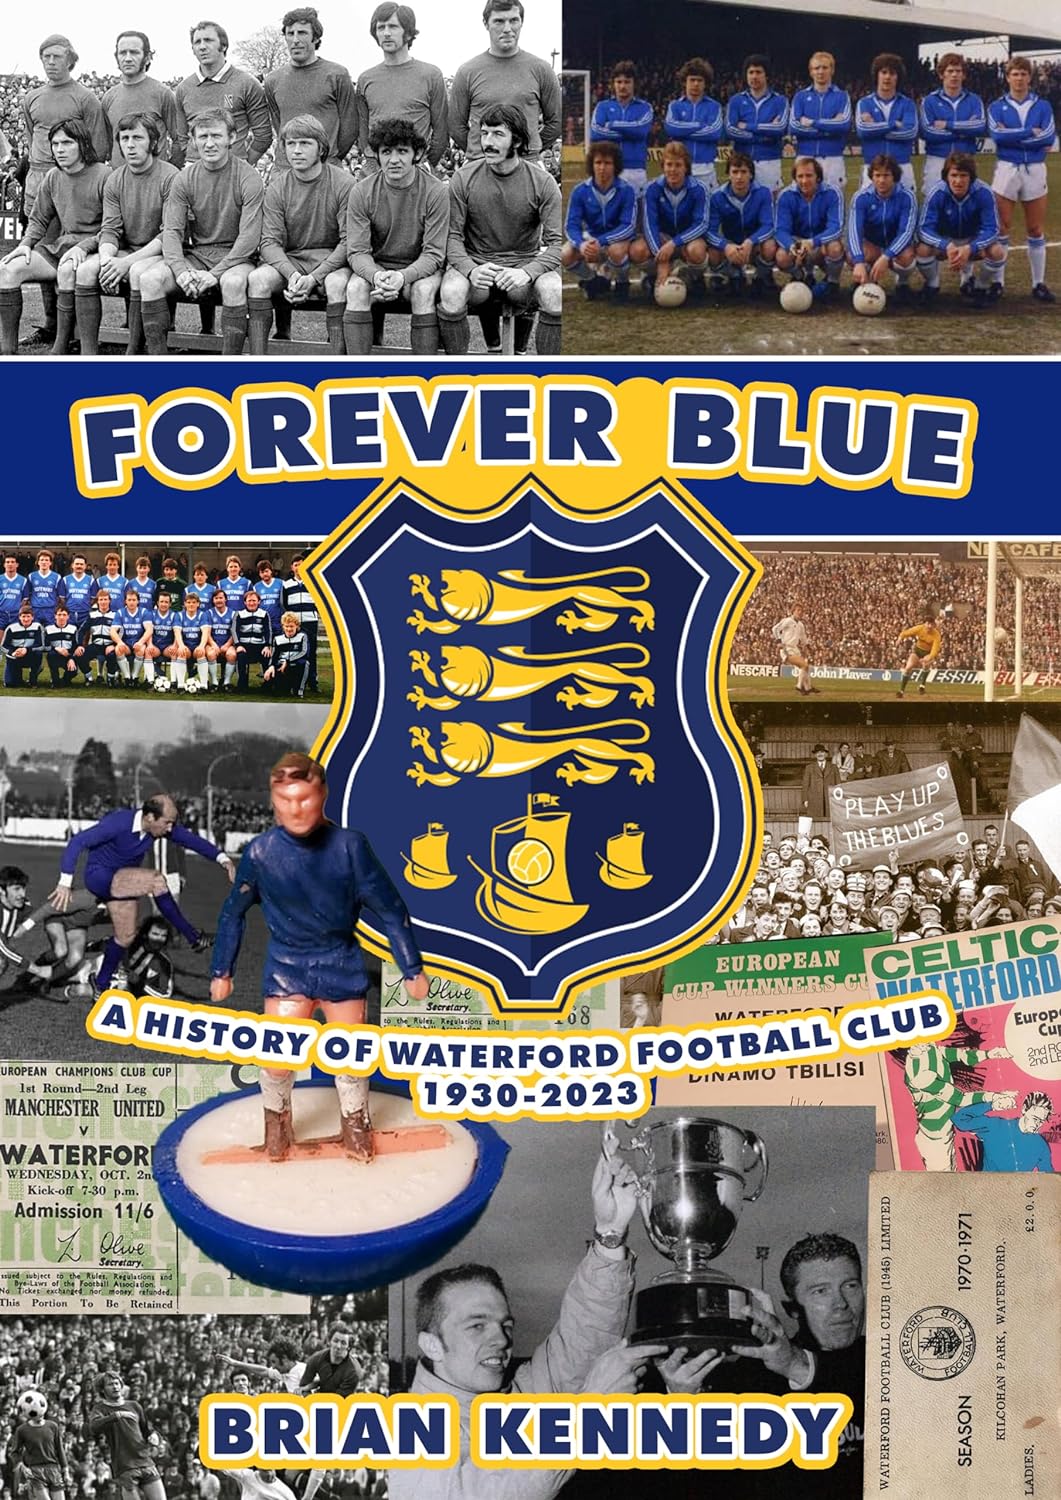 Forever Blue: A History of Waterford Football Club 1930-2023